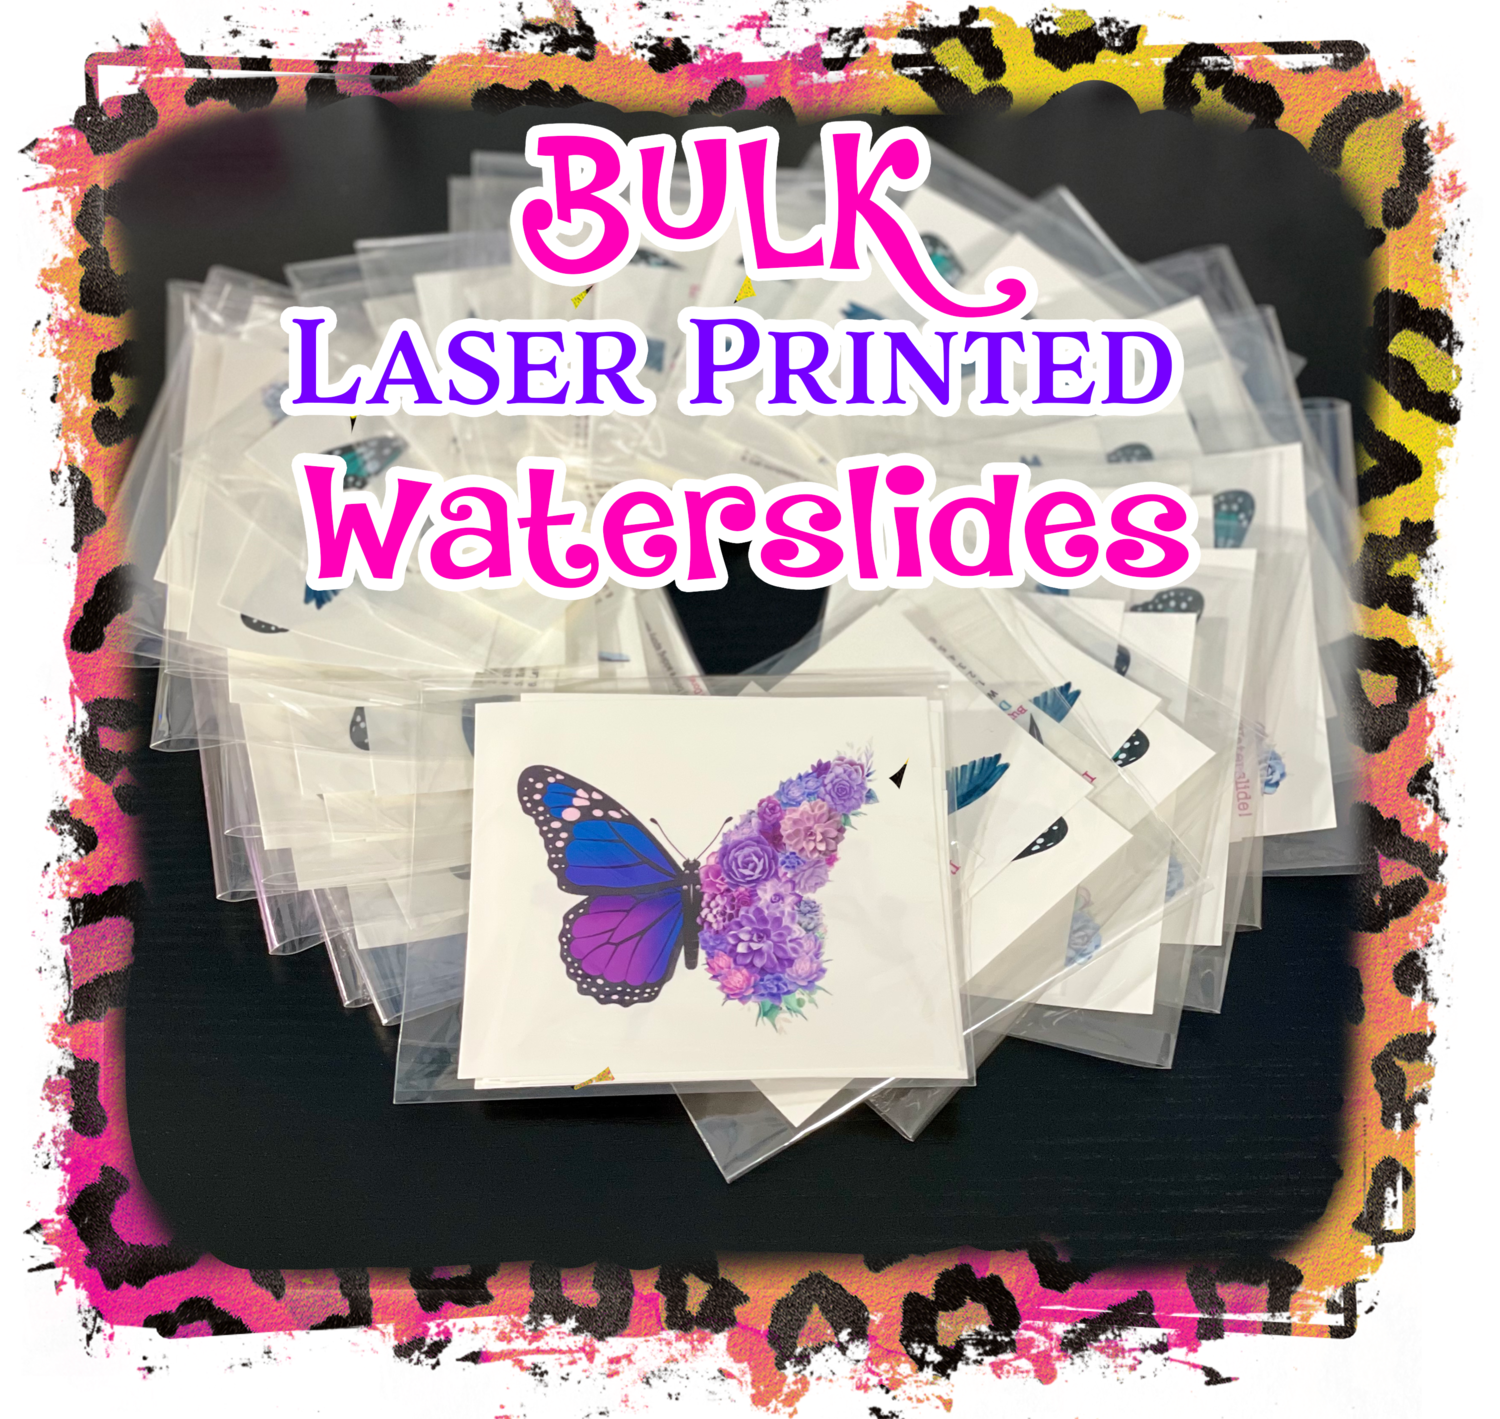 Bulk - For Suppliers with Subscription Boxes, Pre Packaged, Laser Printed Waterslides, 1 or 2 Designs ONLY - FREE SHIPPING